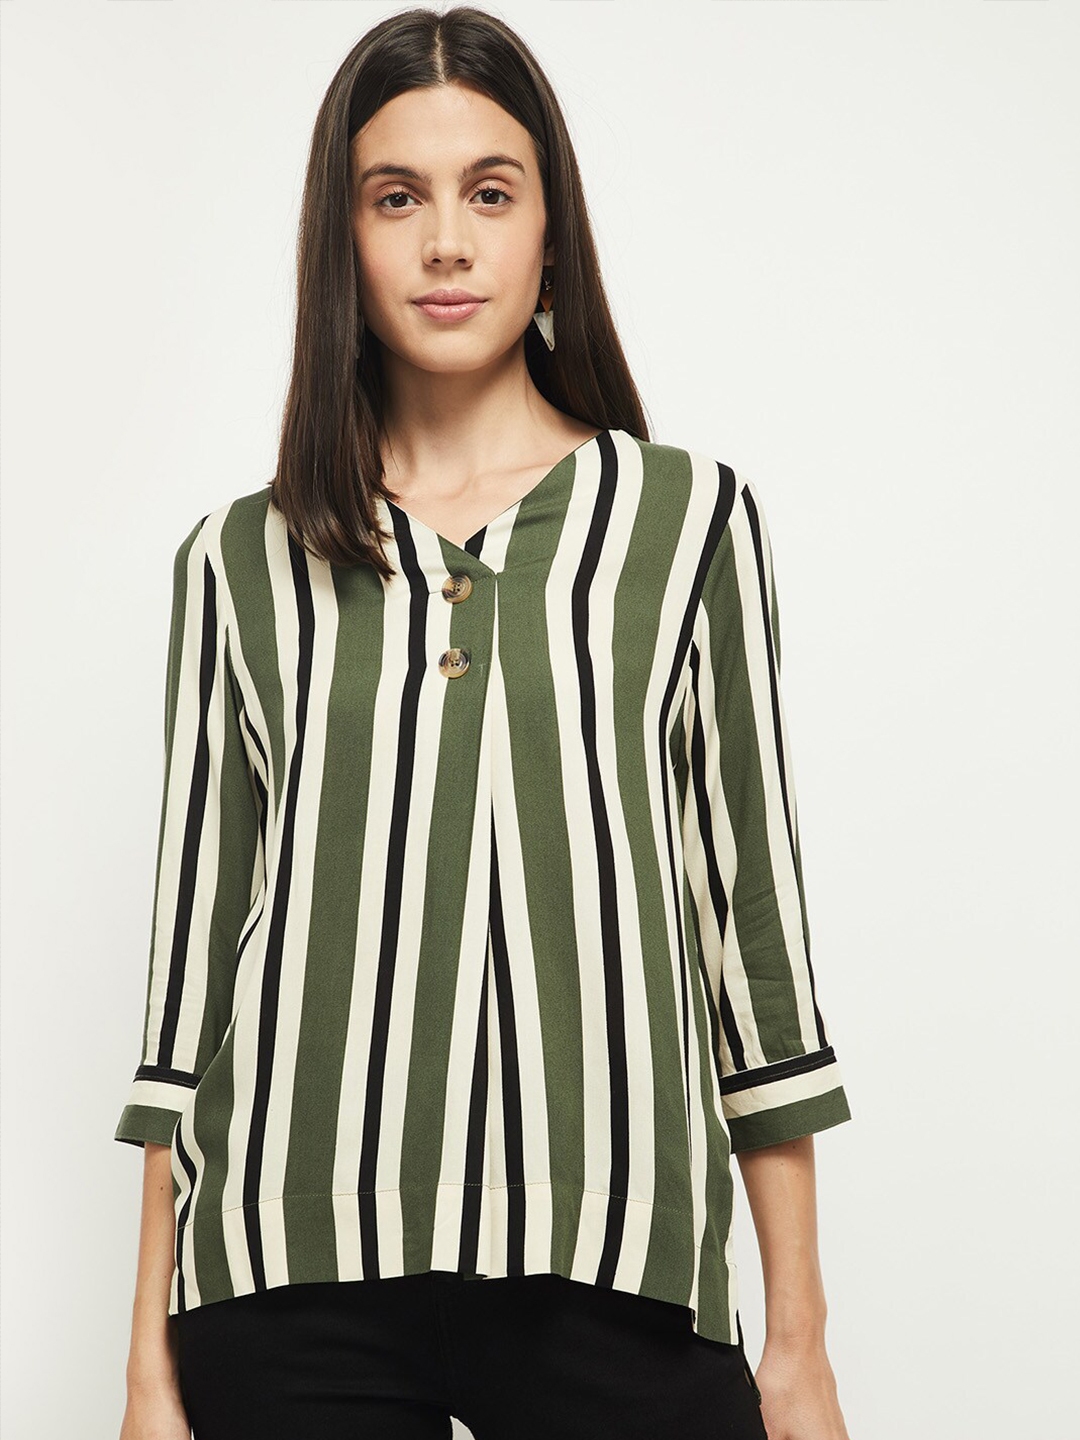 Buy Max Olive Green & Black Striped Top - Tops for Women 16594680 | Myntra